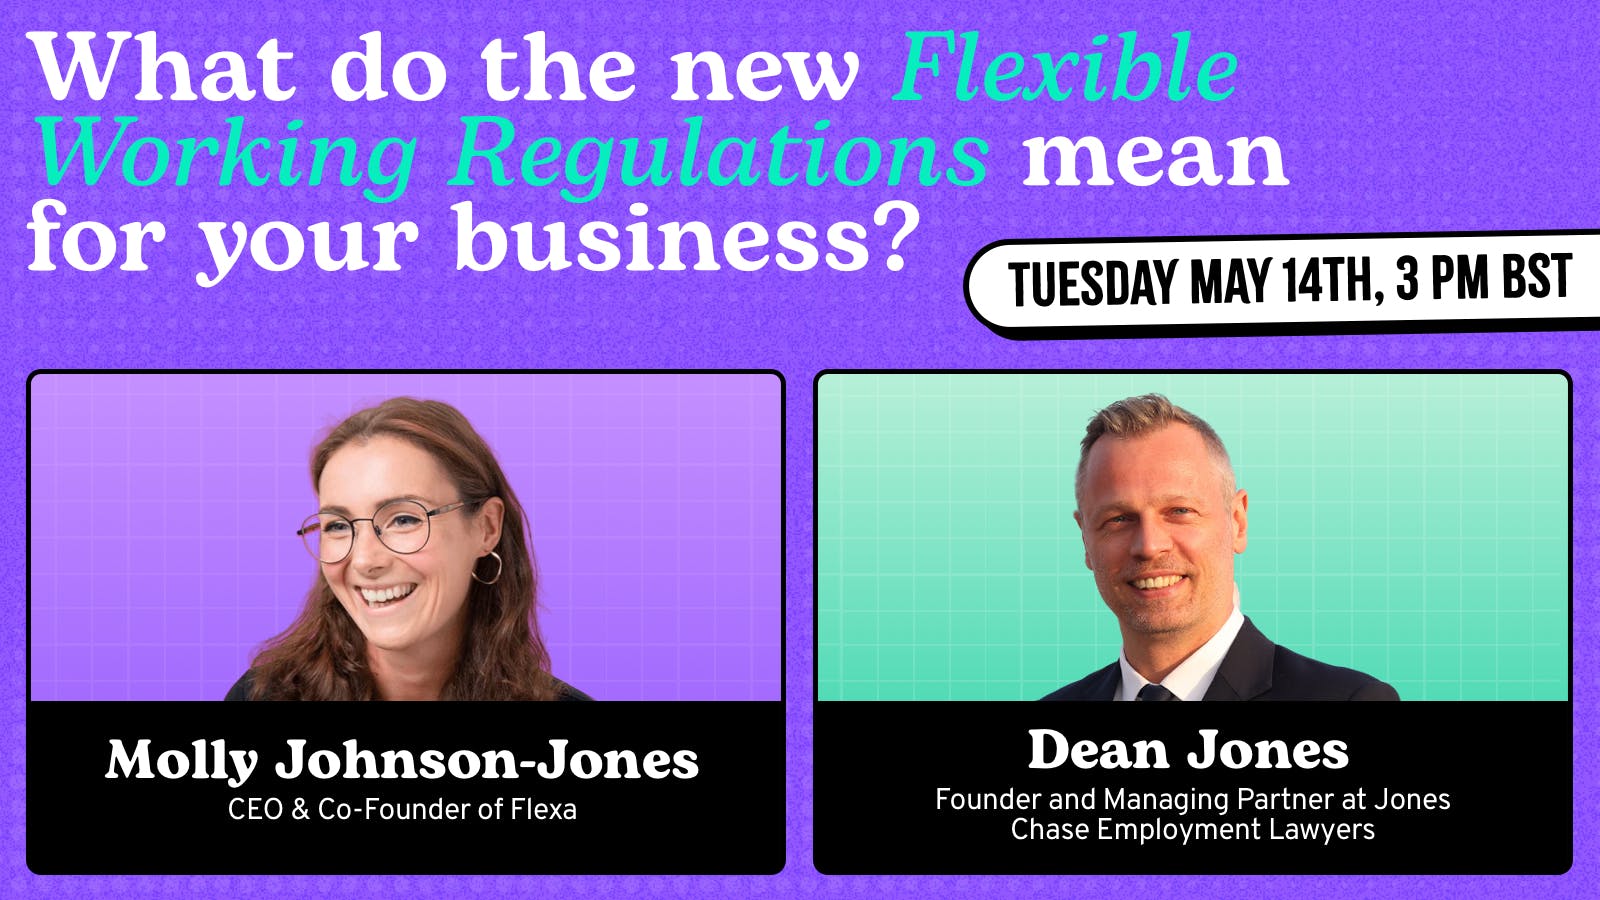 What do the new Flexible Working Regulations mean for your business? event cover photo